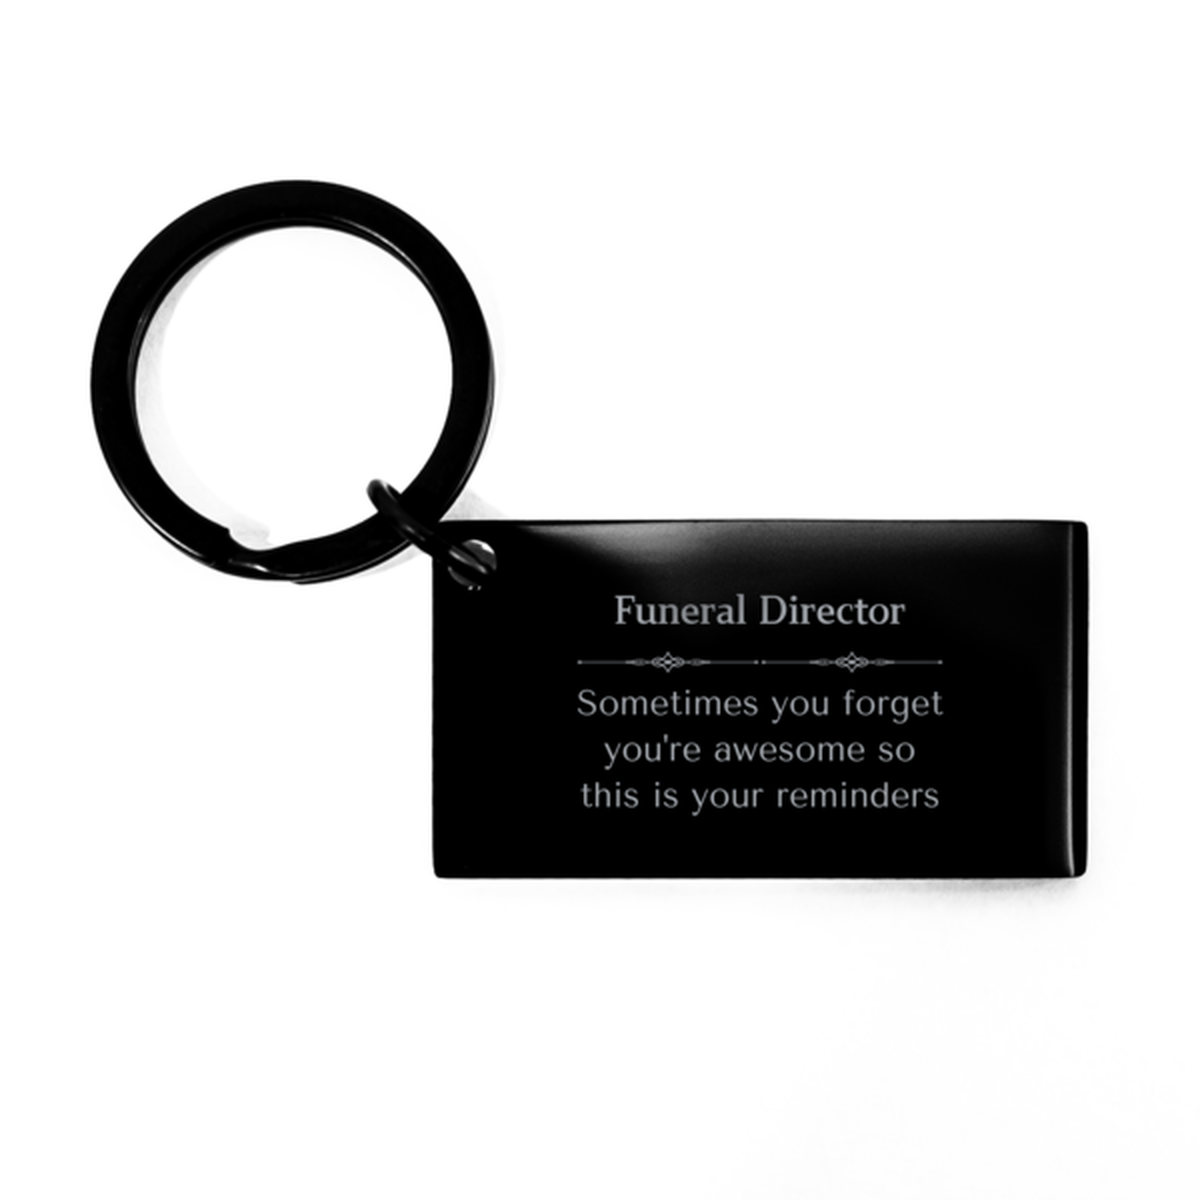 Sentimental Funeral Director Keychain, Machinist Sometimes you forget you're awesome so this is your reminders, Graduation Christmas Birthday Gifts for Funeral Director, Men, Women, Coworkers